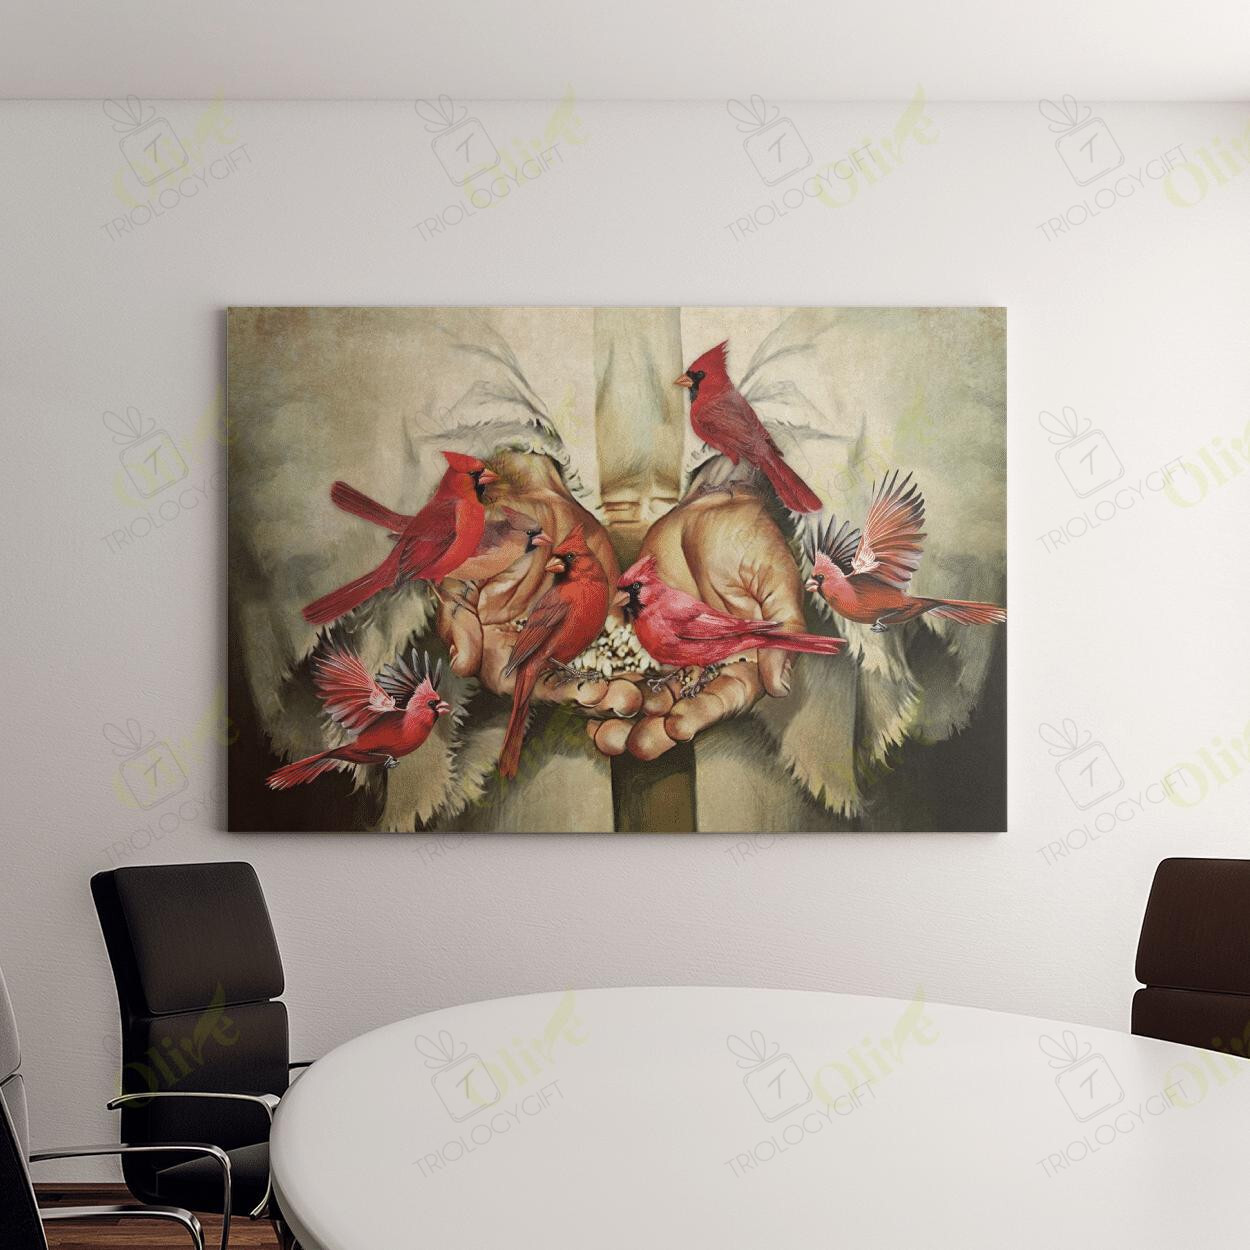 Cardinal In Gods Hands Easter And Wall Decor Visual Art Poster 18x12in